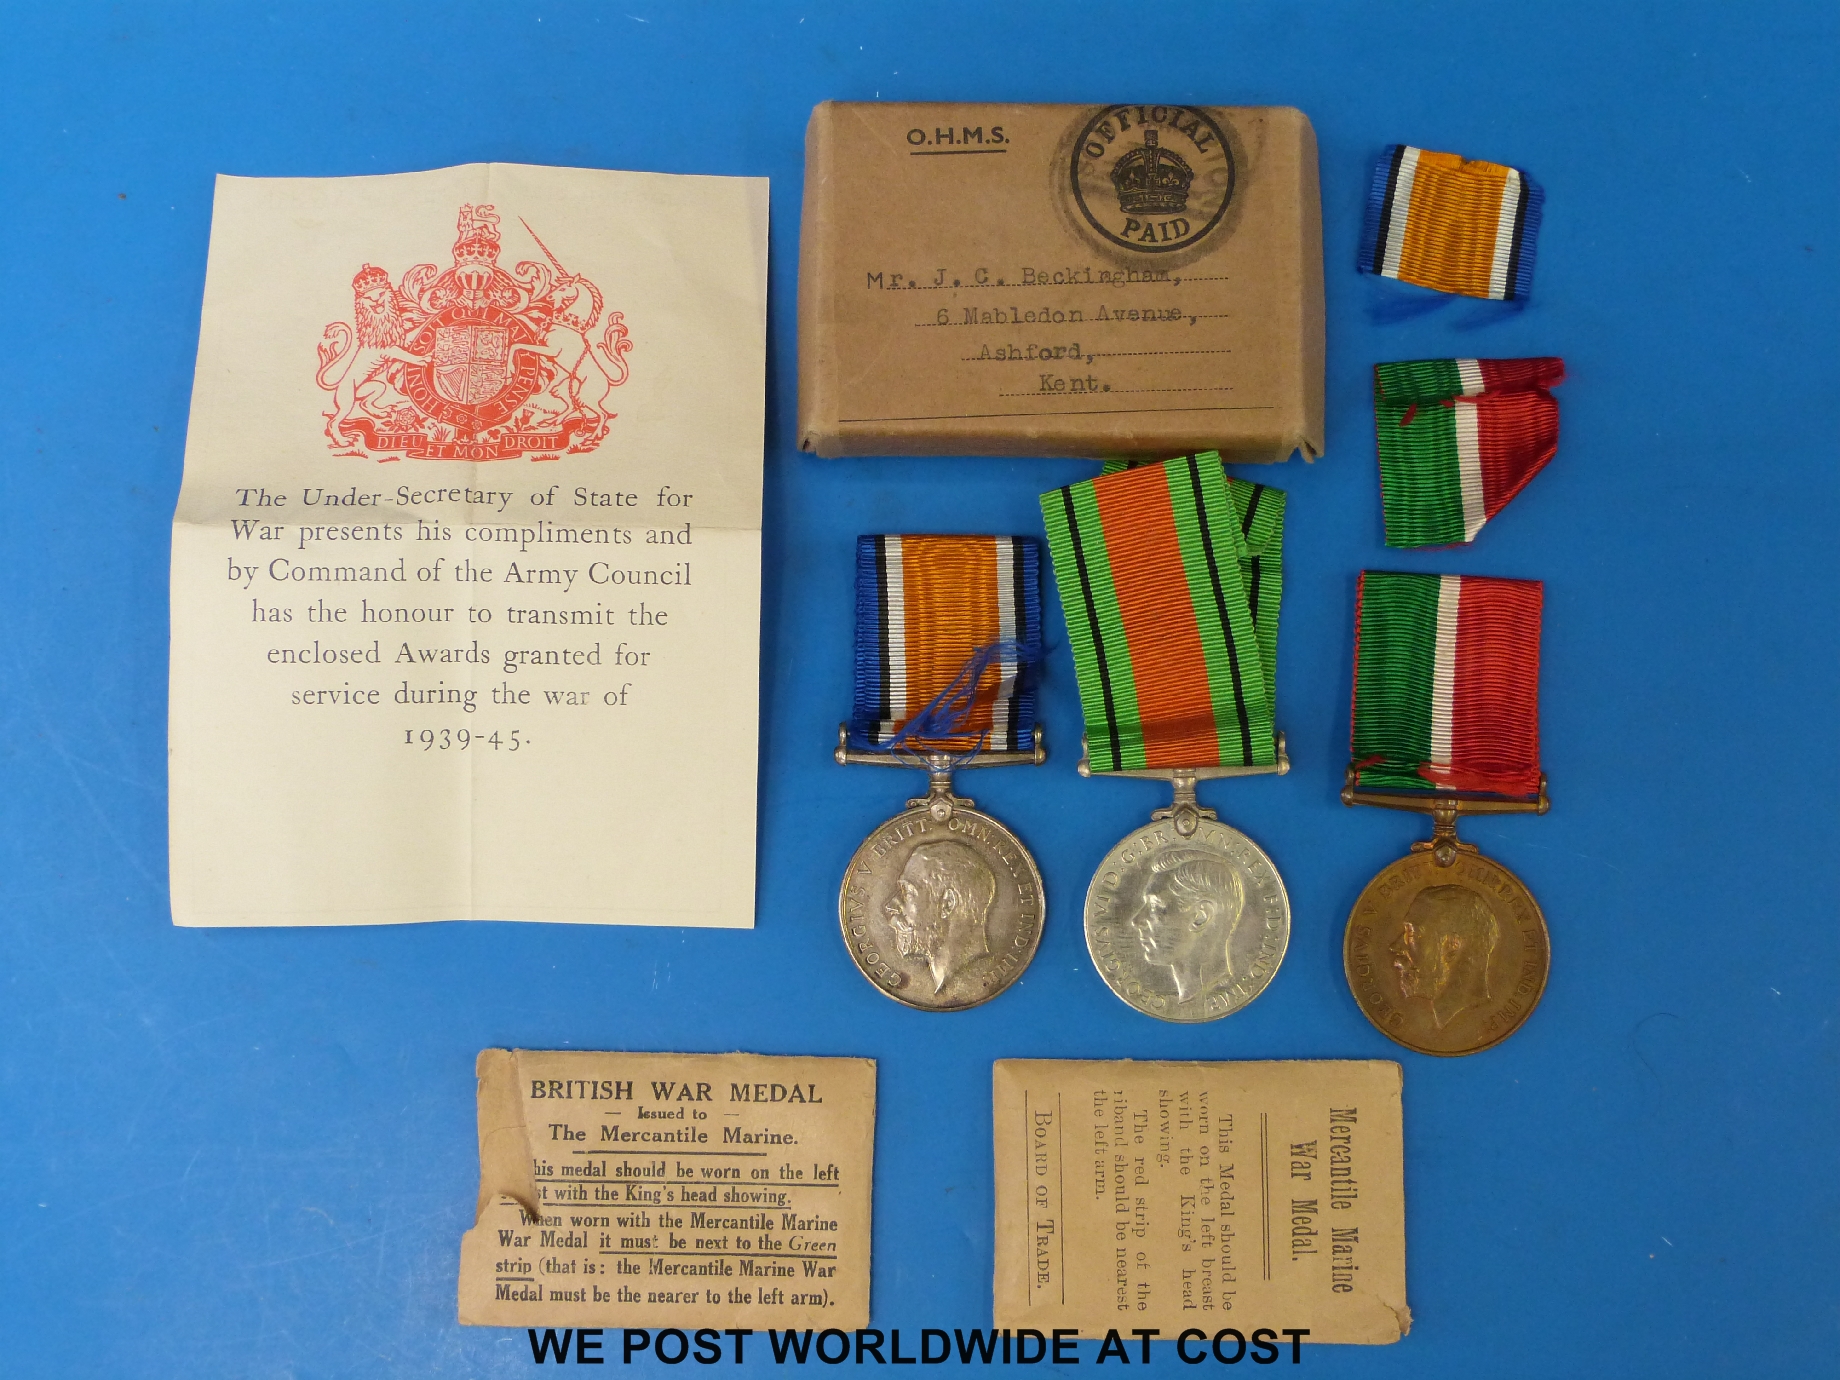 A WWI medal group comprising 1914 -18 medal and Merchantile Marine medal both awarded to John C